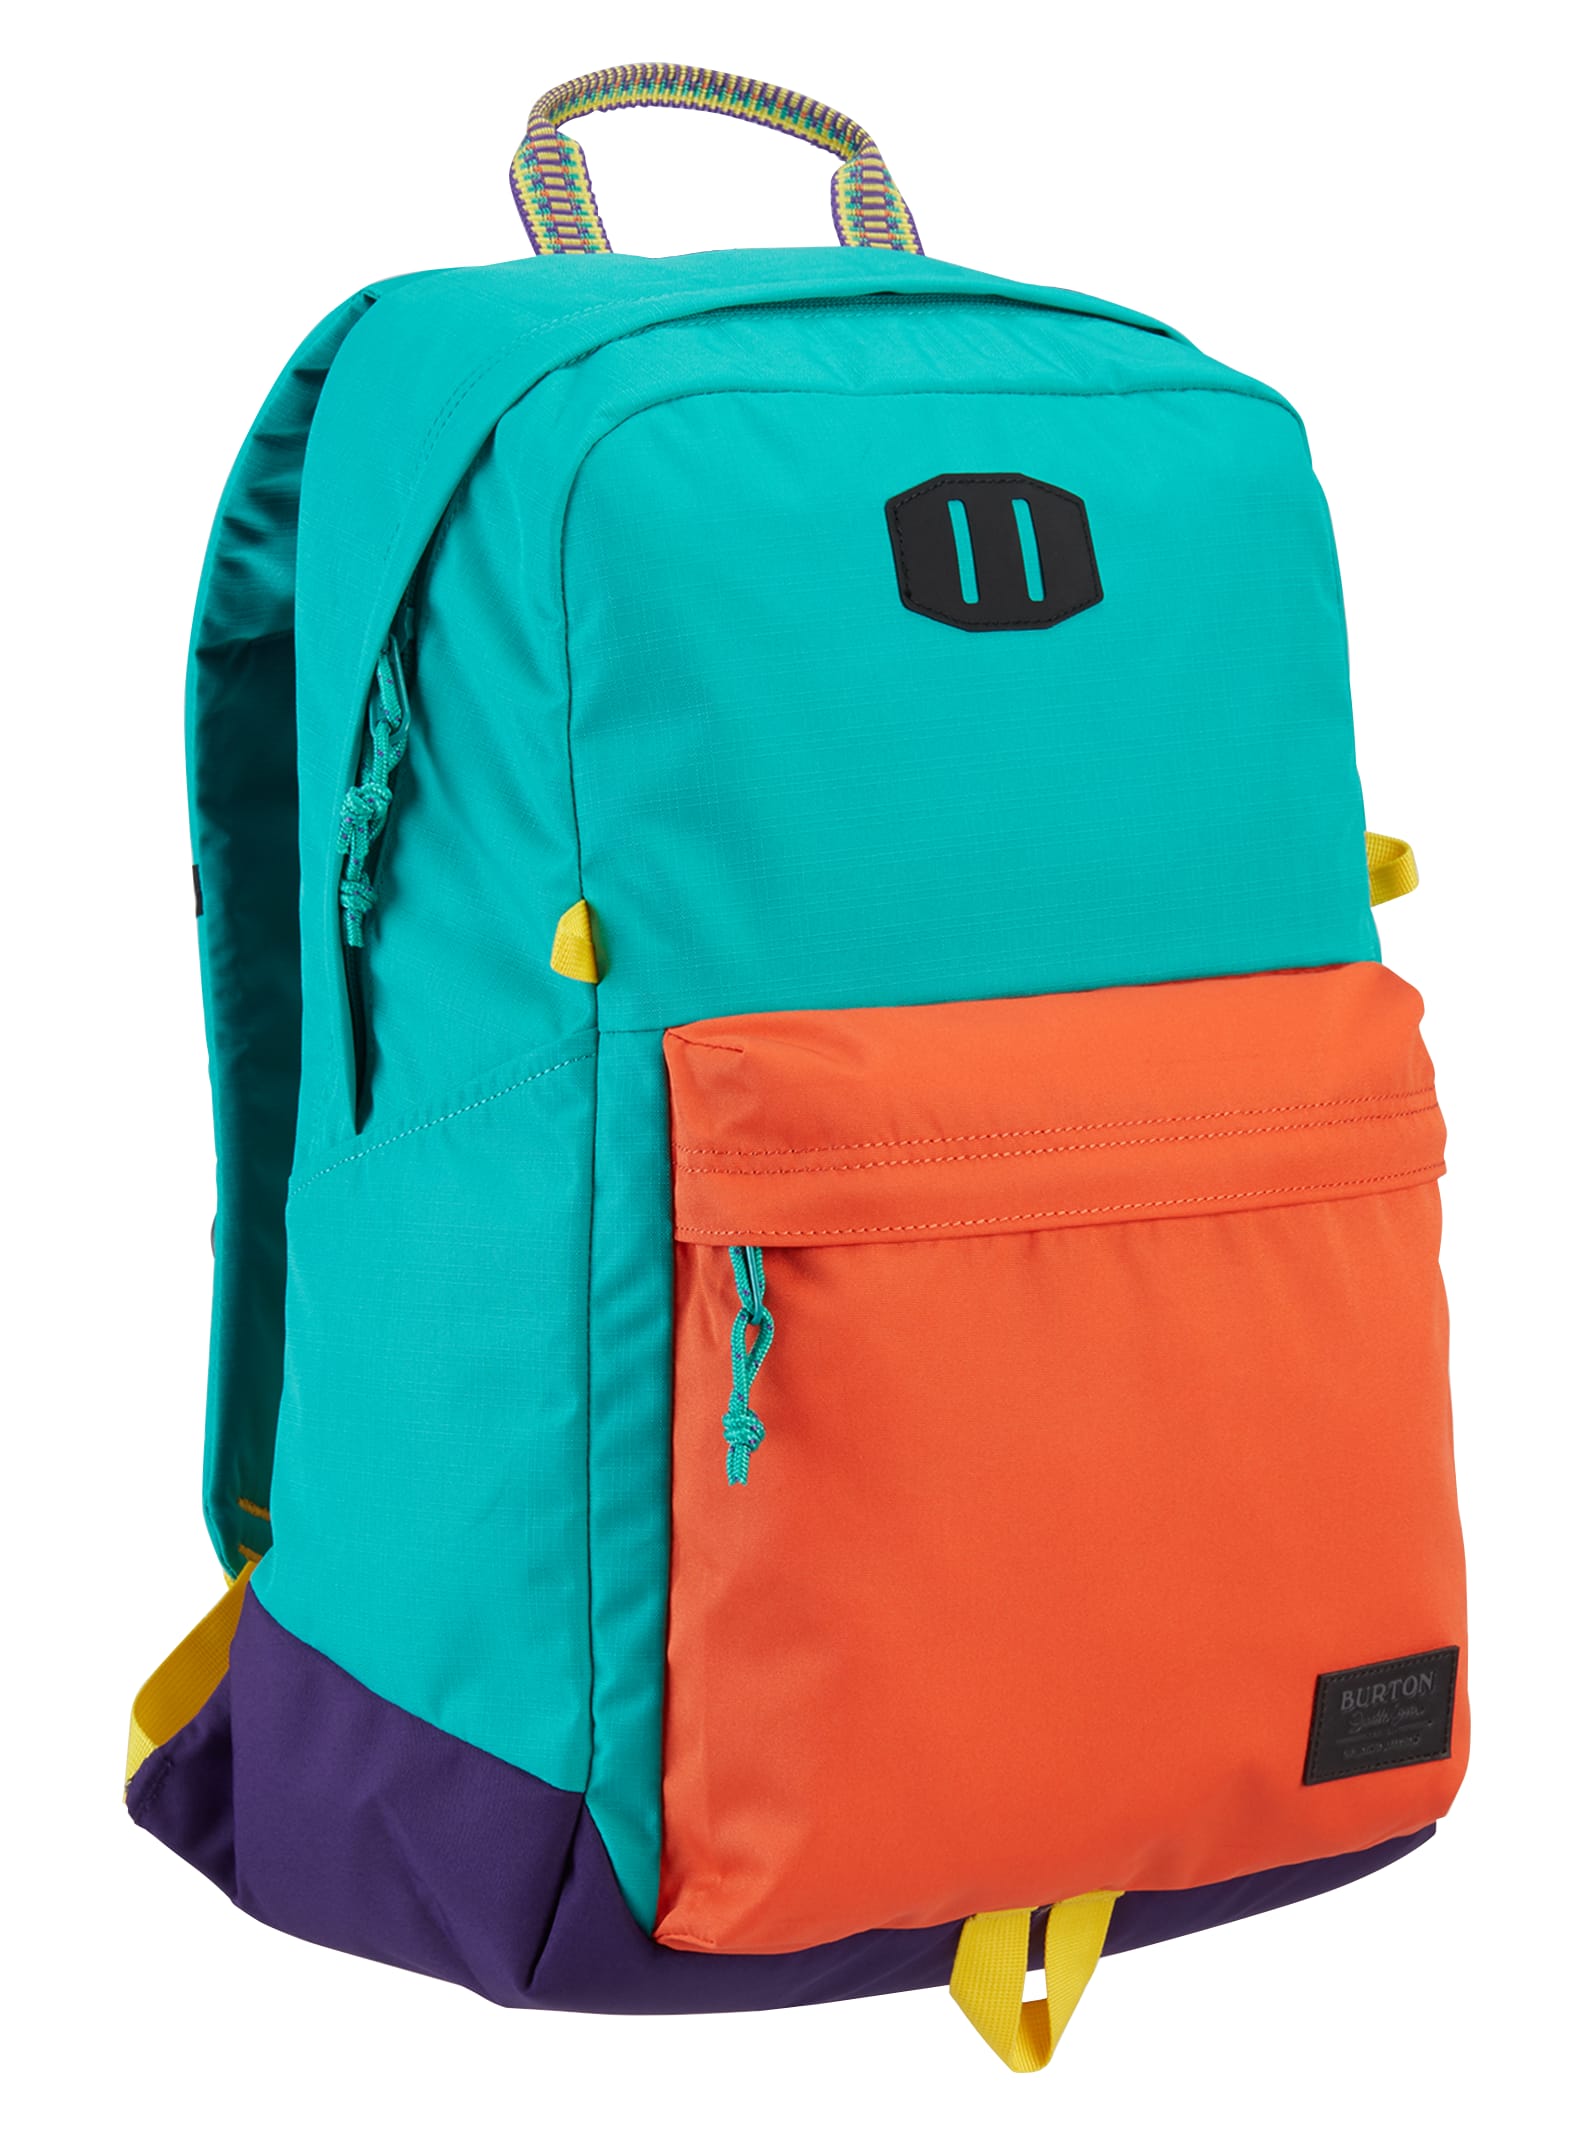 Bags and Luggage Sale | Burton Snowboards US